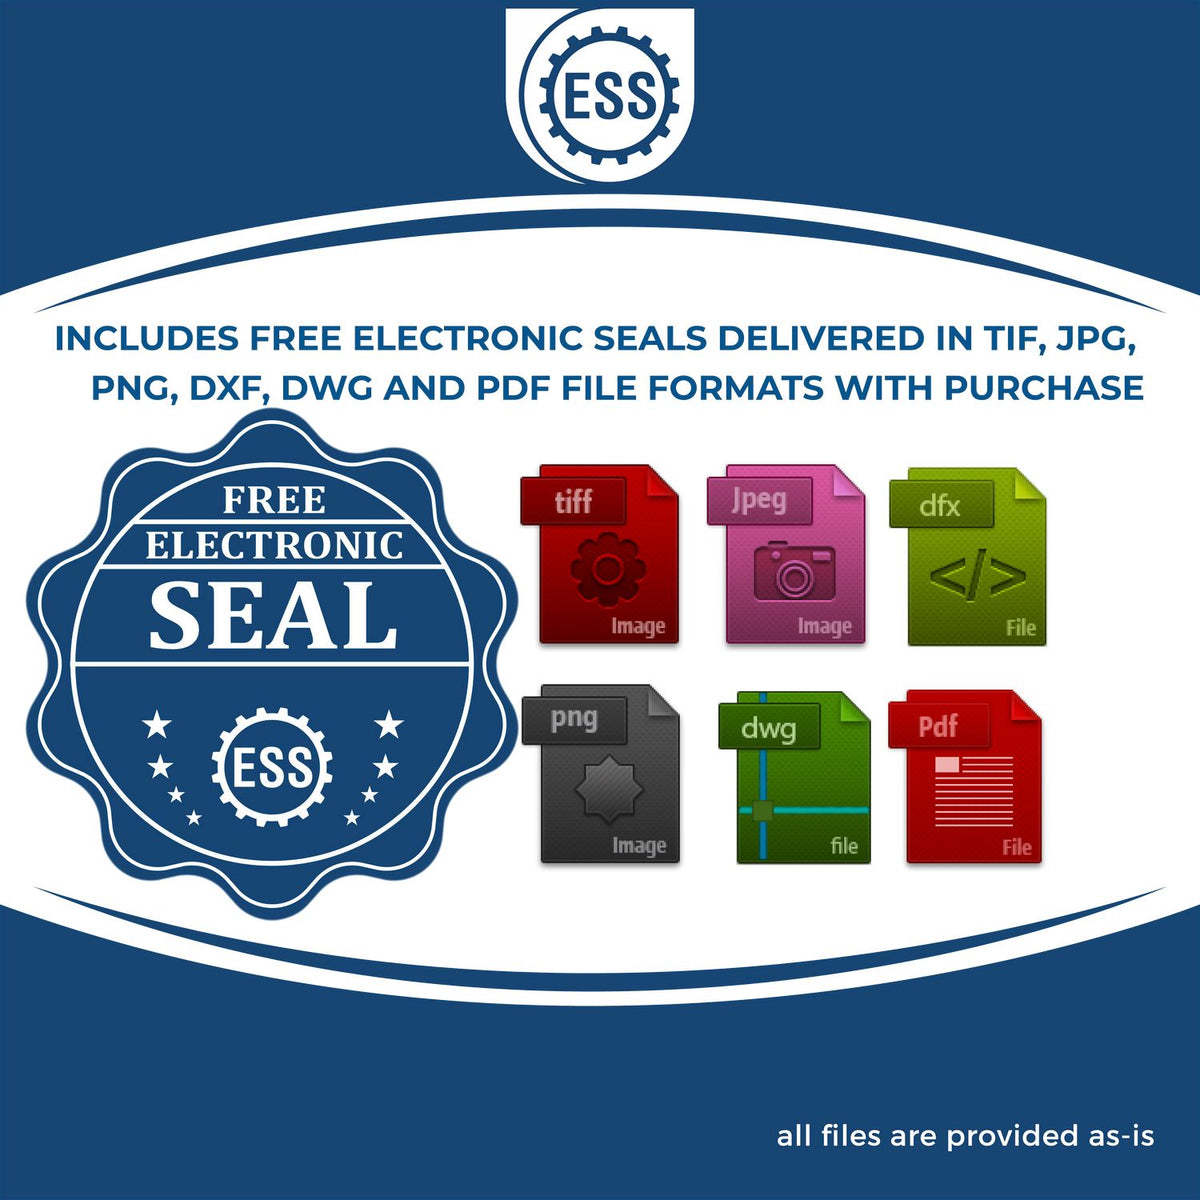 An infographic for the free electronic seal for the PSI Texas Notary Stamp illustrating the different file type icons such as DXF, DWG, TIF, JPG and PNG.